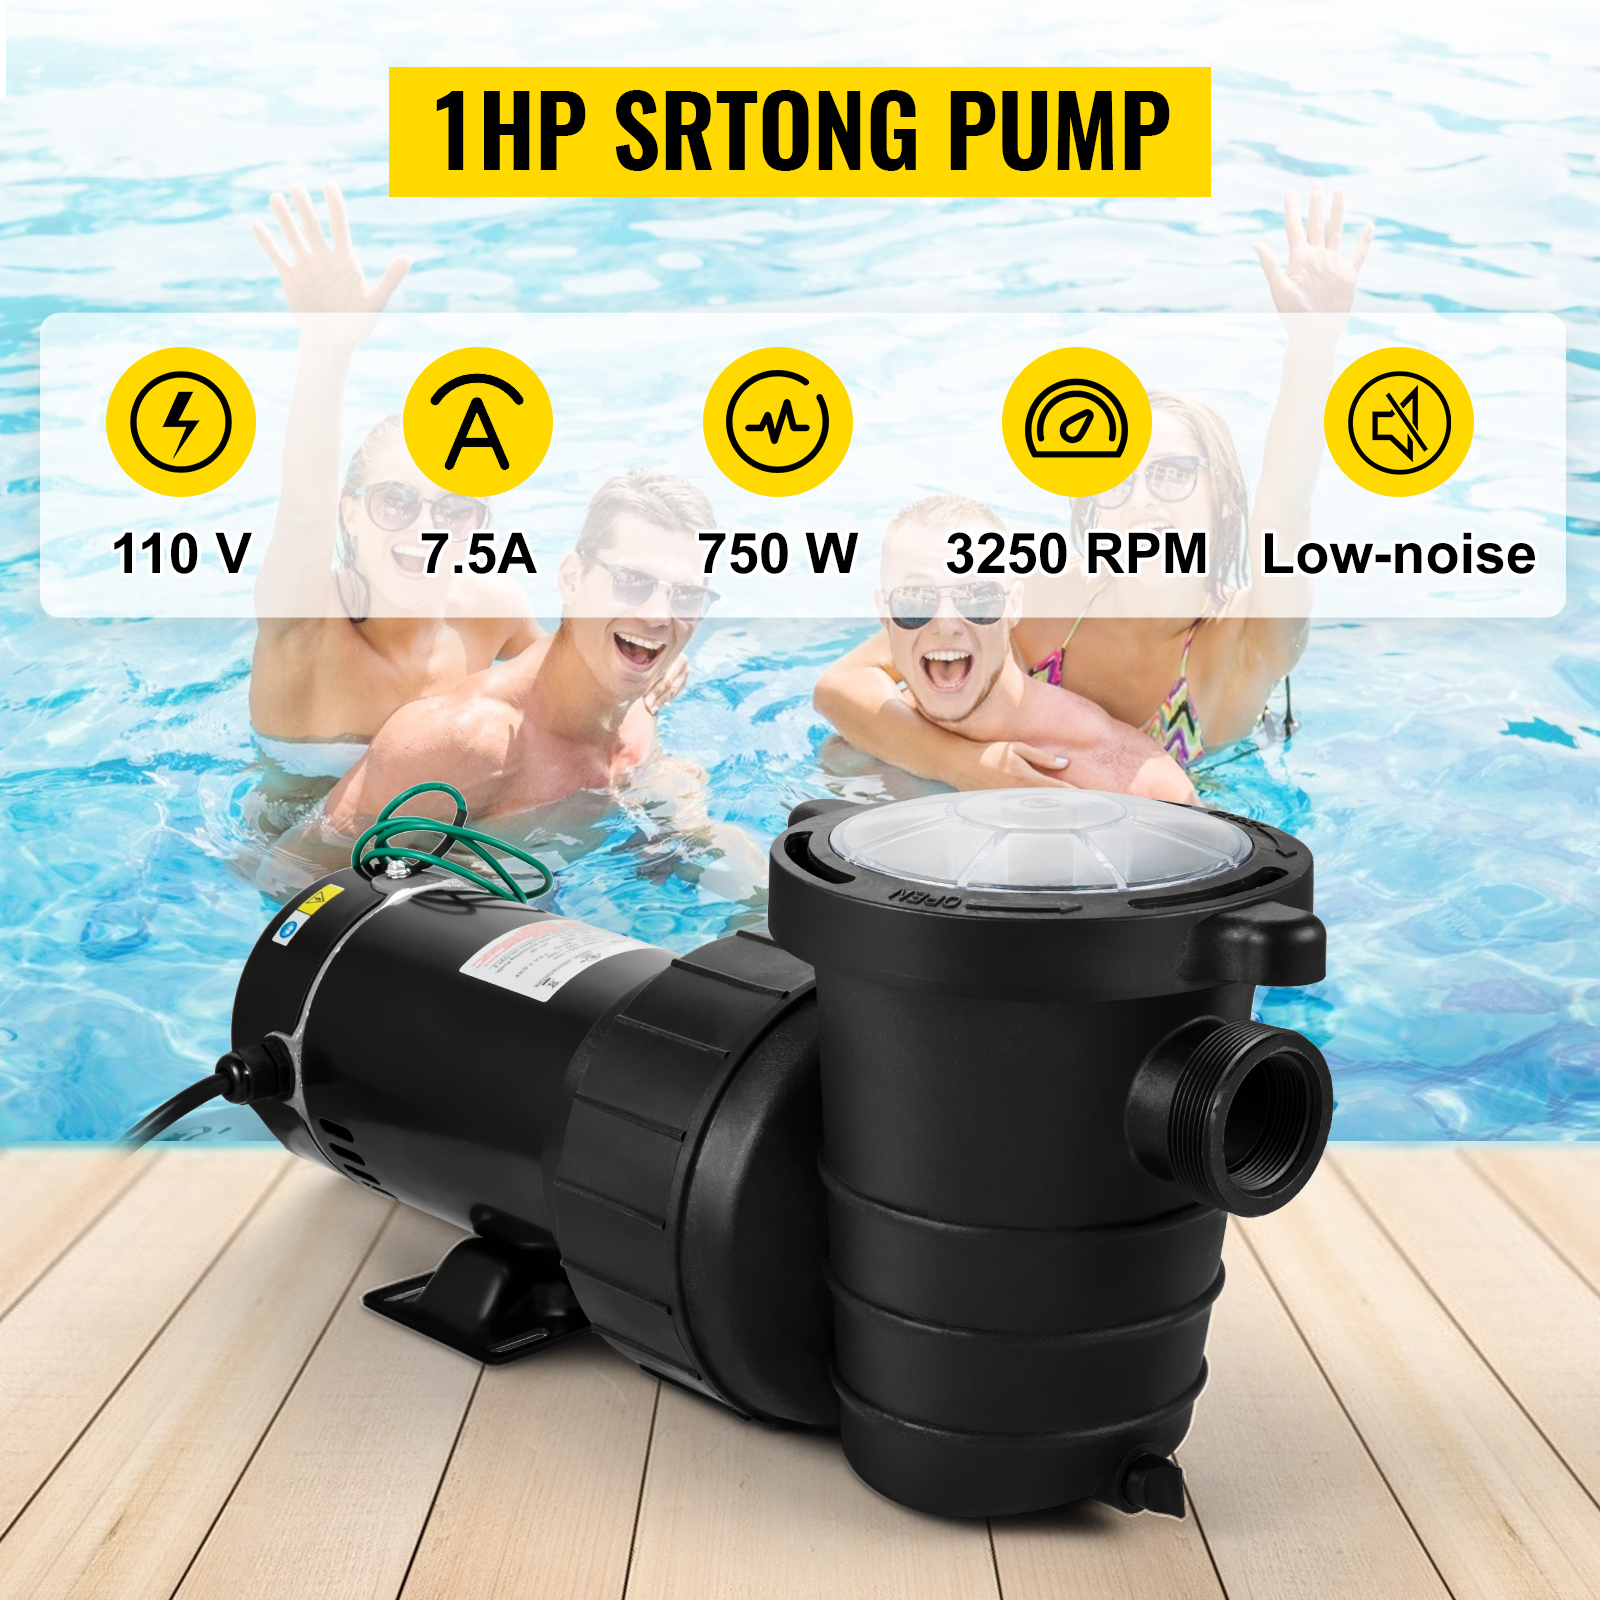 VEVOR Swimming Pool Pump, 1HP 110V 5220GPH Self-priming Up to 36ft Head Lift, for In/Above Ground Pool Water Circulation, w/ Strainer Basket and 2pcs 1-1/2'' NPT Connectors, UL Certified | VEVOR